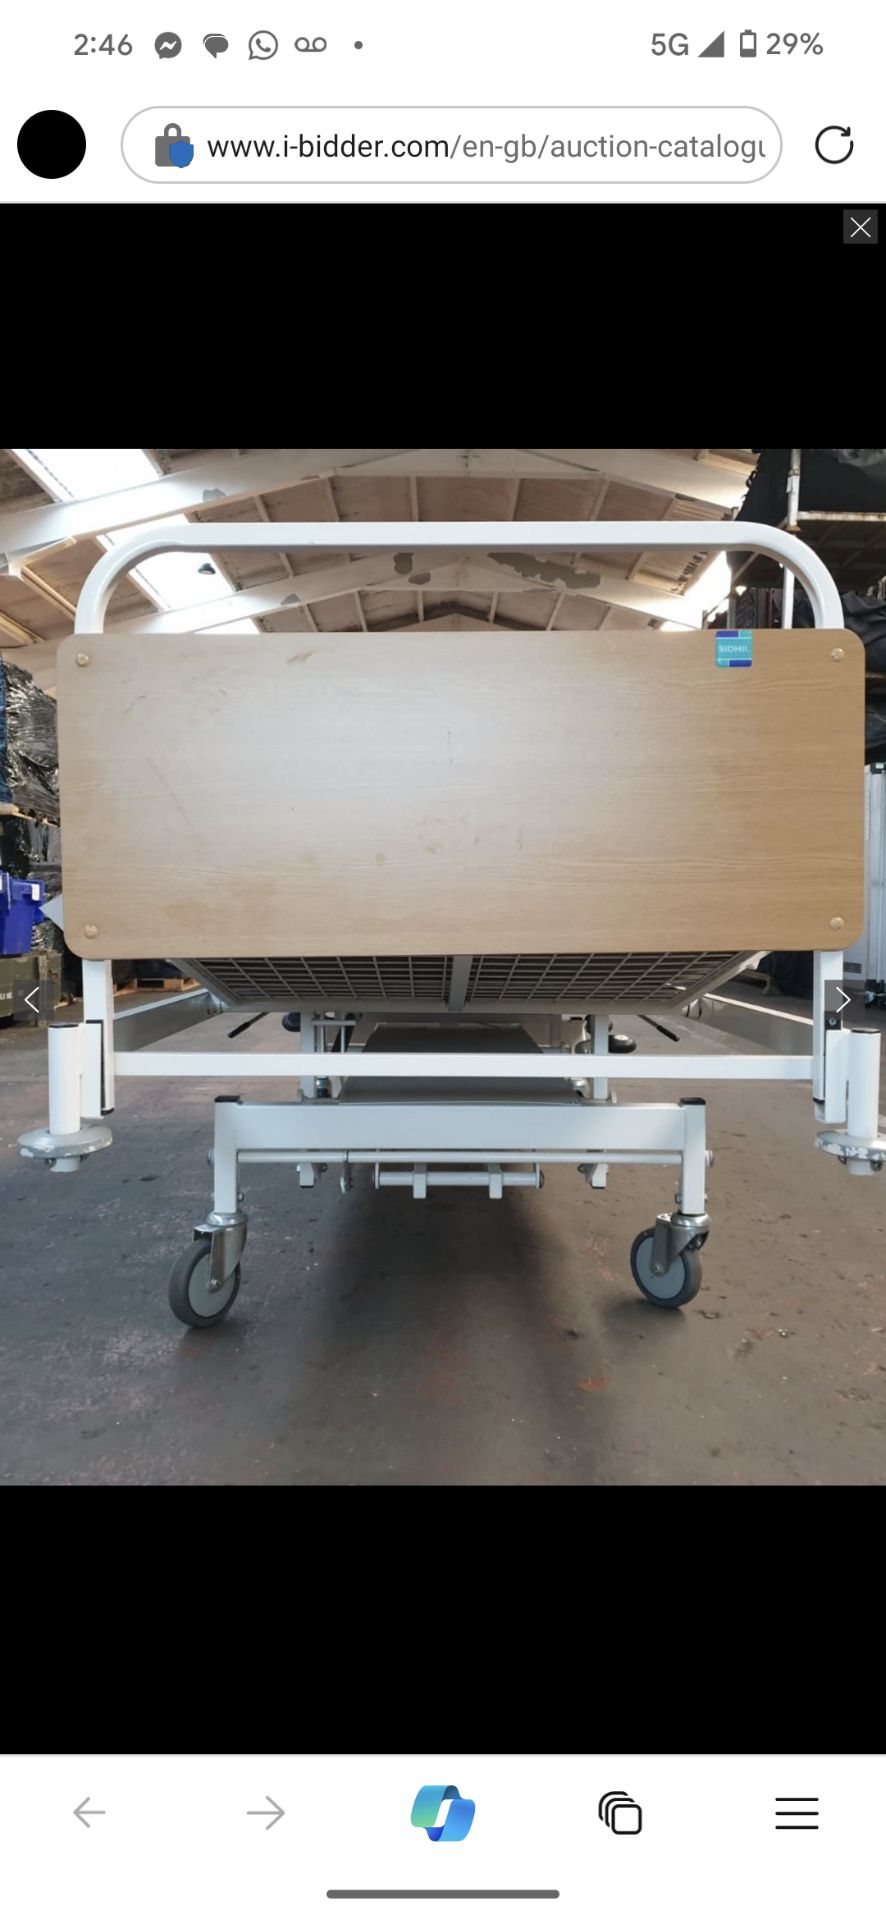 5 X SIDHL 2 WAY TILT HYDRAULIC LIFT HOSPITAL BEDS WITH MATTRESSES - Image 4 of 6